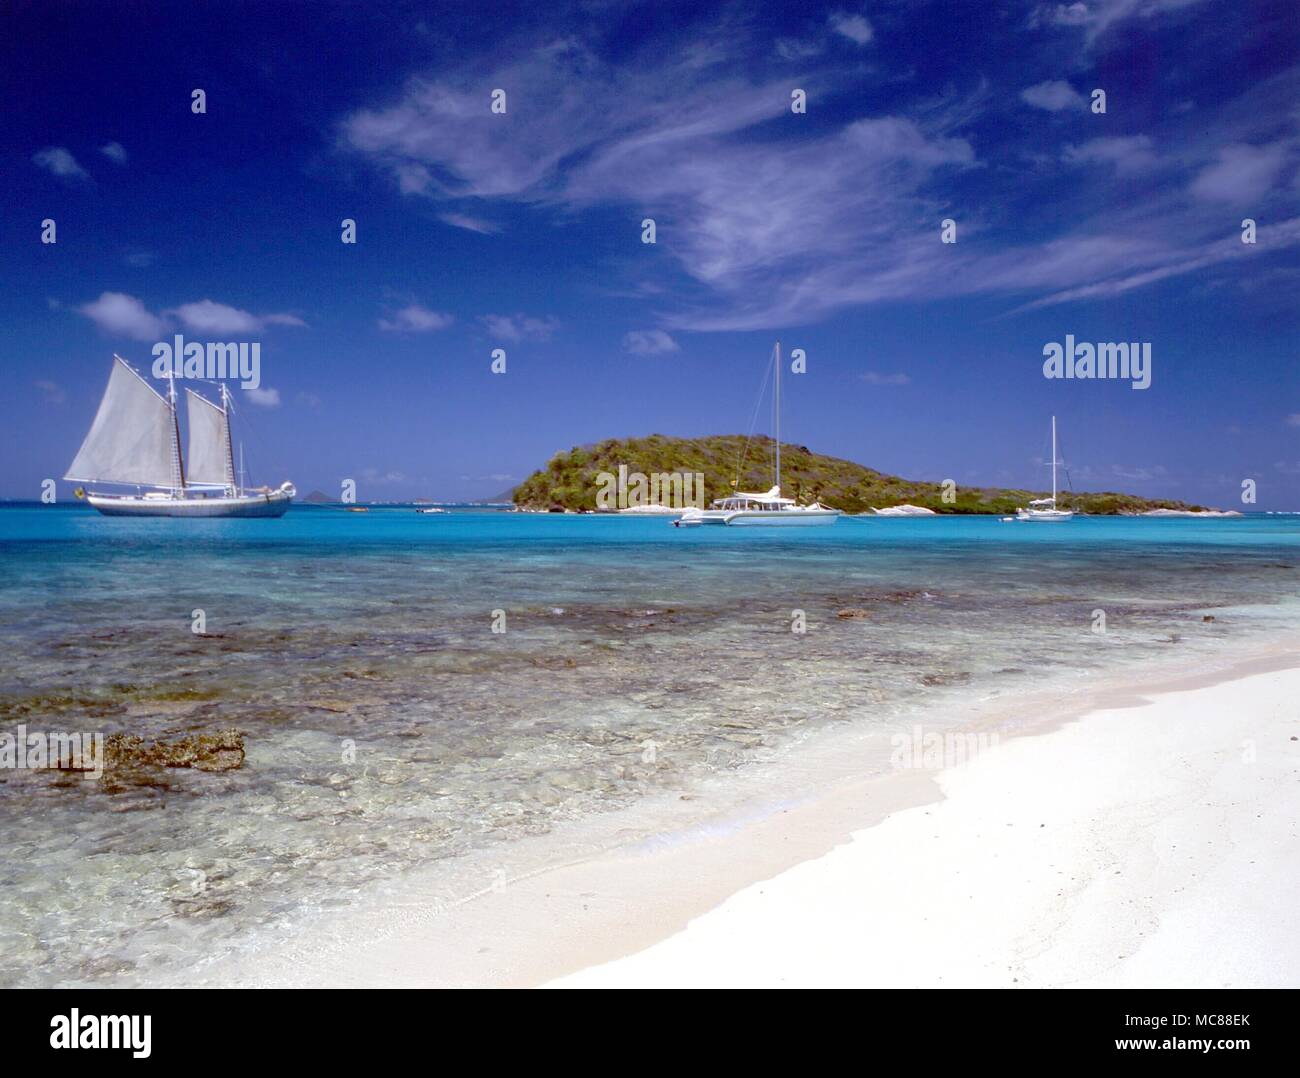 TROPICAL ISLANDS Palm Island, in the Grenadines of te west Indies. Beach and boats Stock Photo